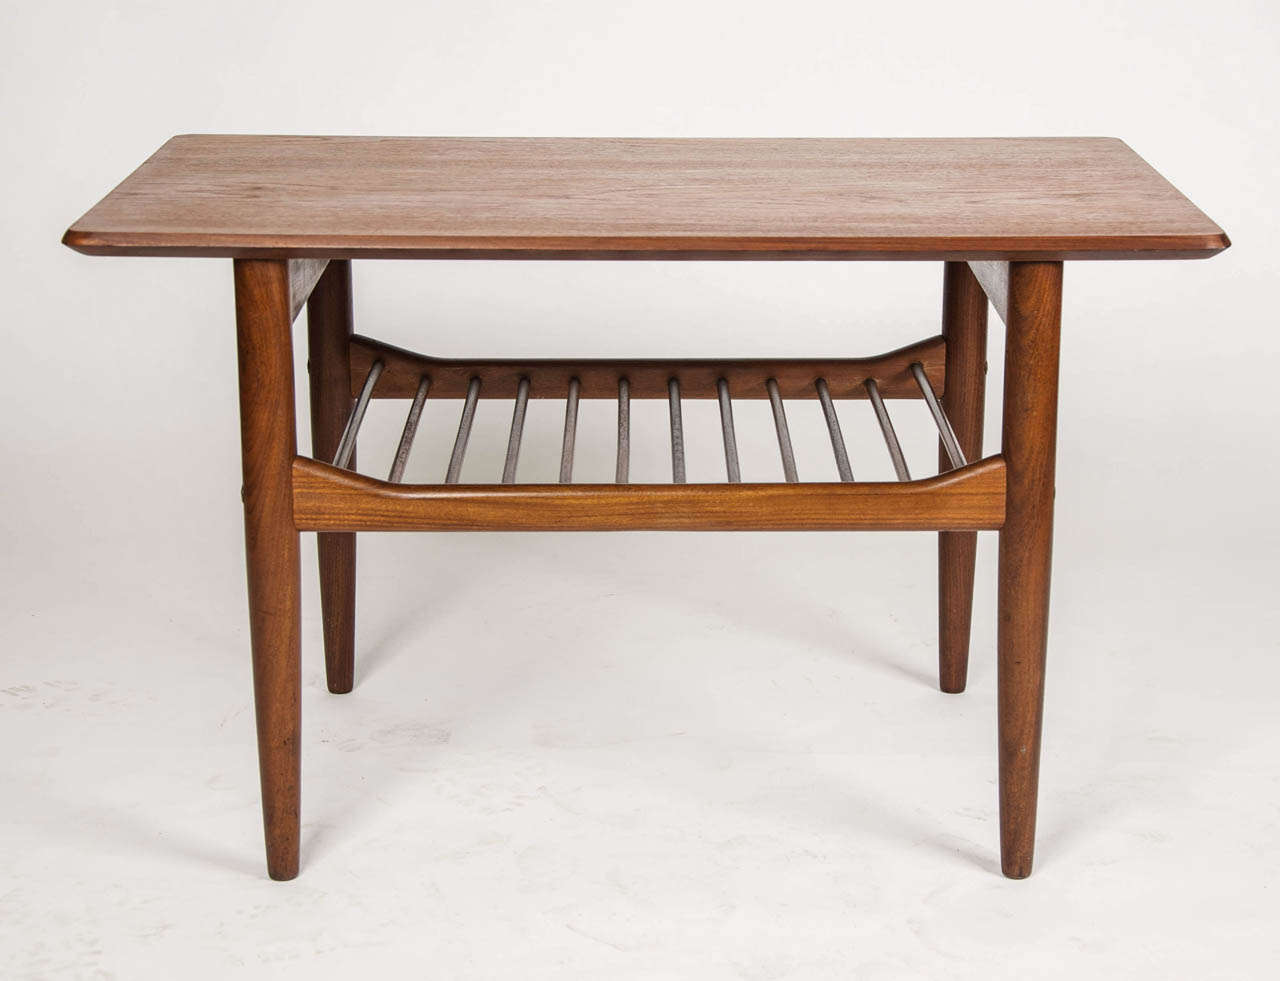 A 1960,s teak coffee table manufactured by G-Plan and designed by Ib Kofod- Larsen. Fully marked on the underside of the table top.